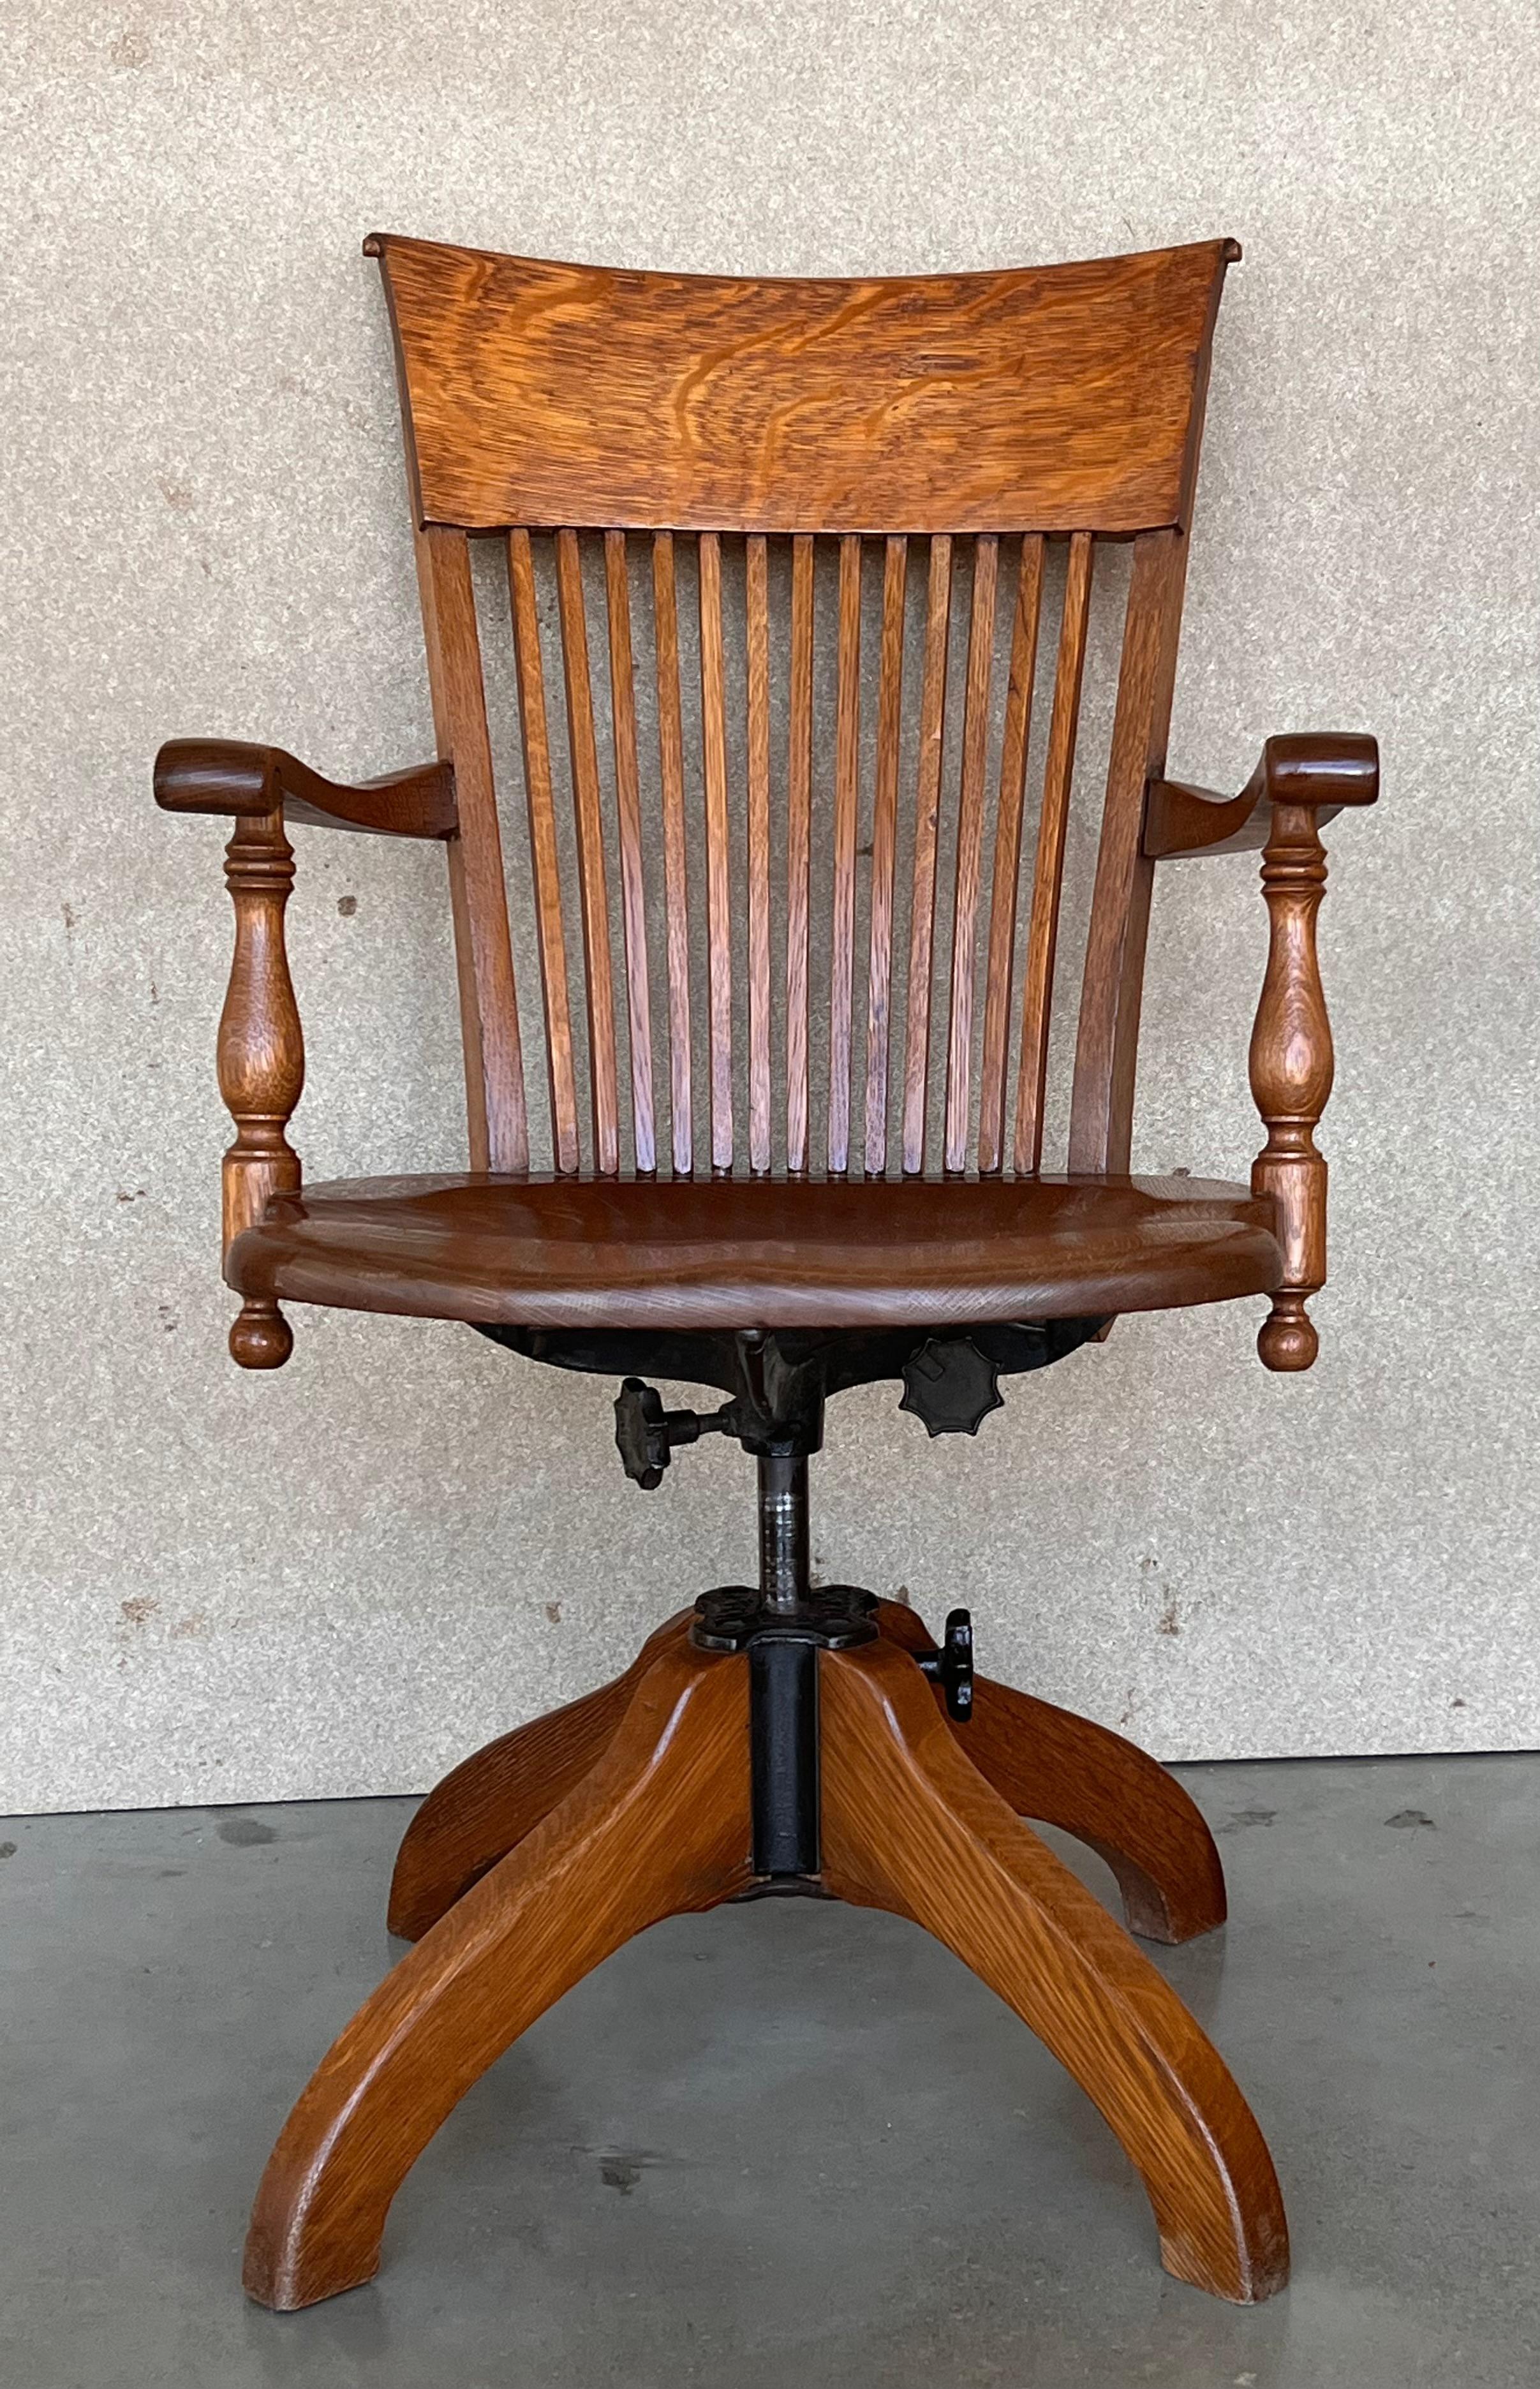 Modernist swivel chair by unknown designer. Manufactured in Barcelona circa 1940. Wood. In original condition with minor wear consistent of age and use, preserving a beautiful patina.

Height to the arms: 65cm.